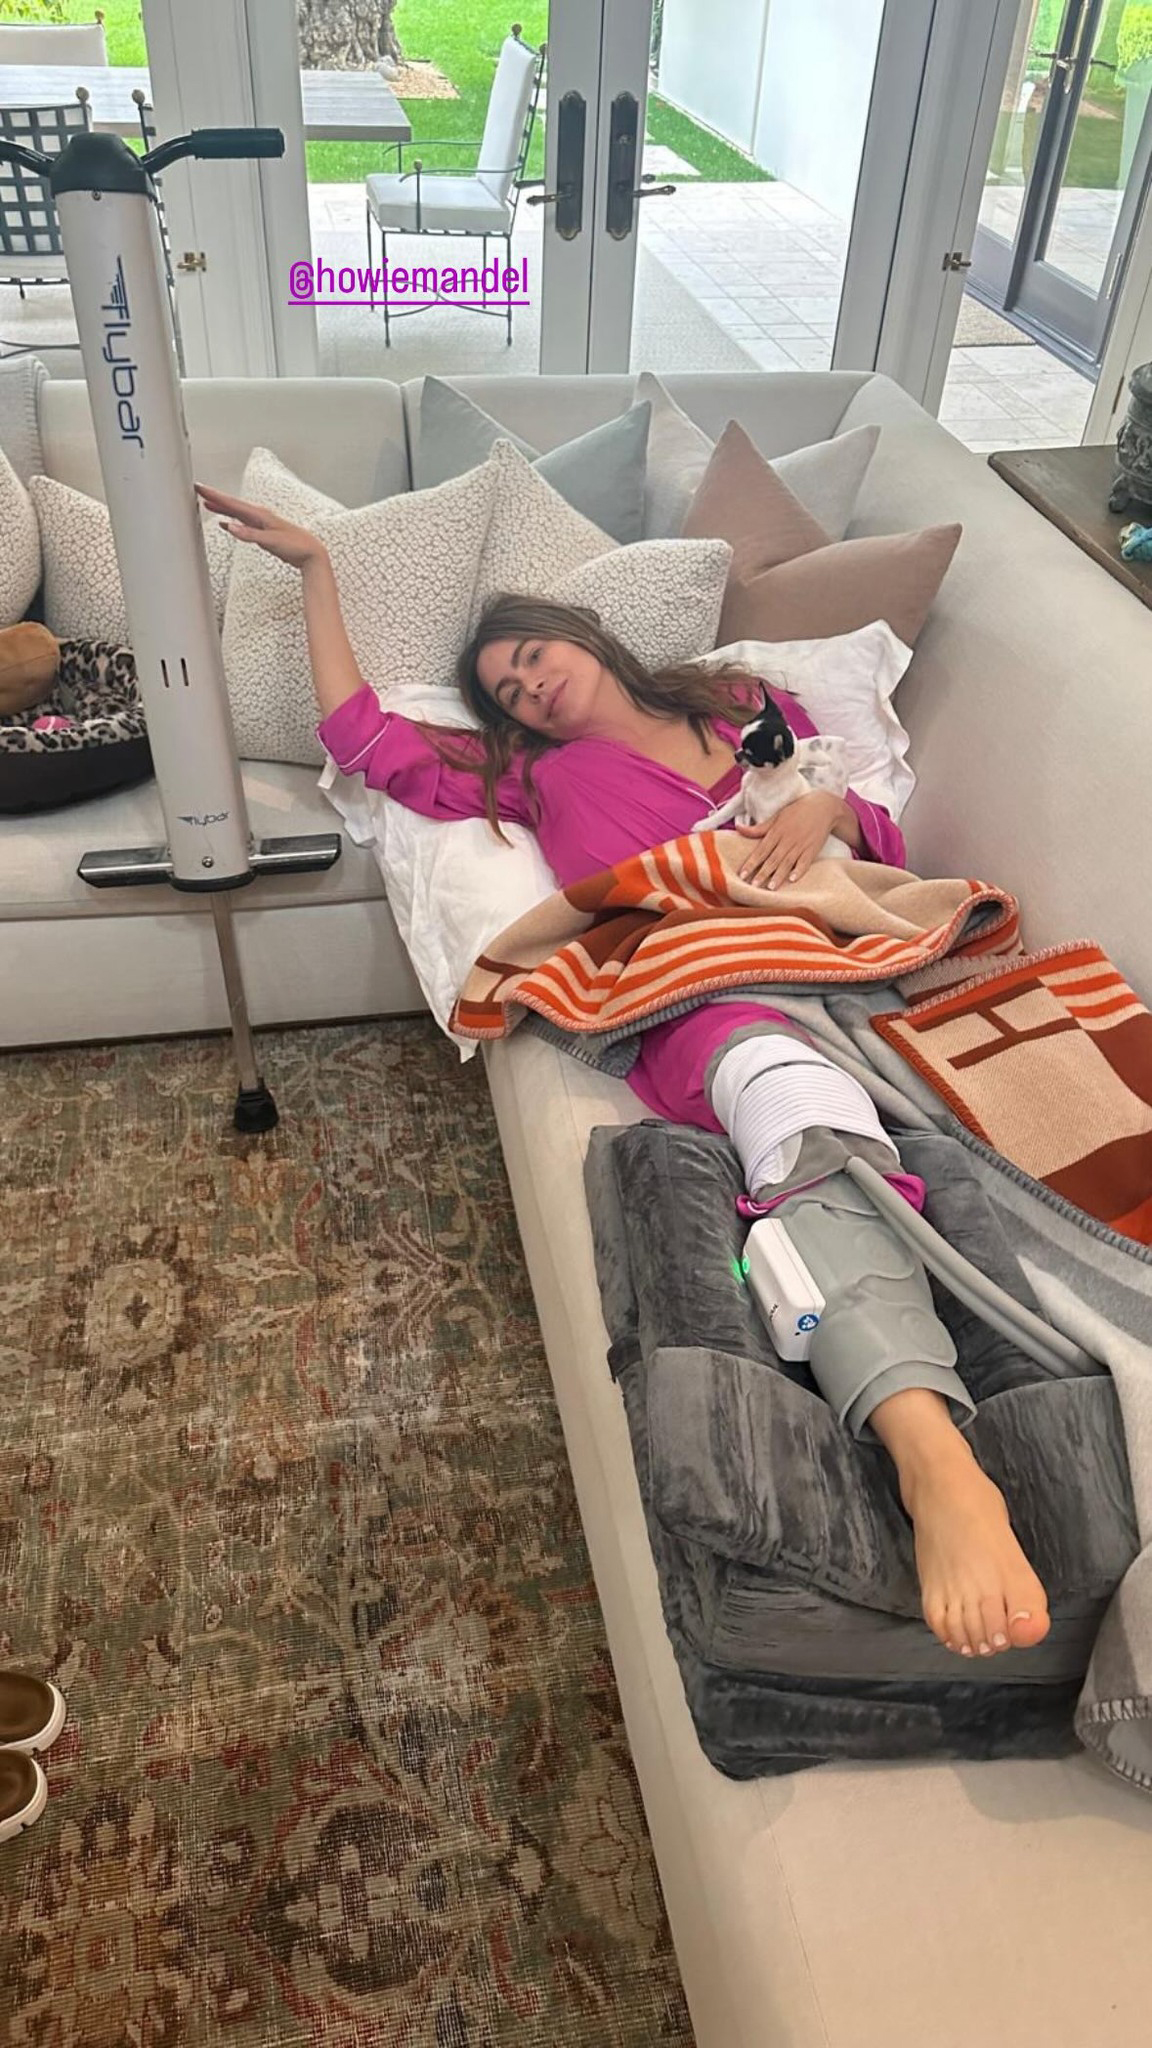 On her Instagram Stories, the America's Got Talent star remained on her couch with a large cast on her leg